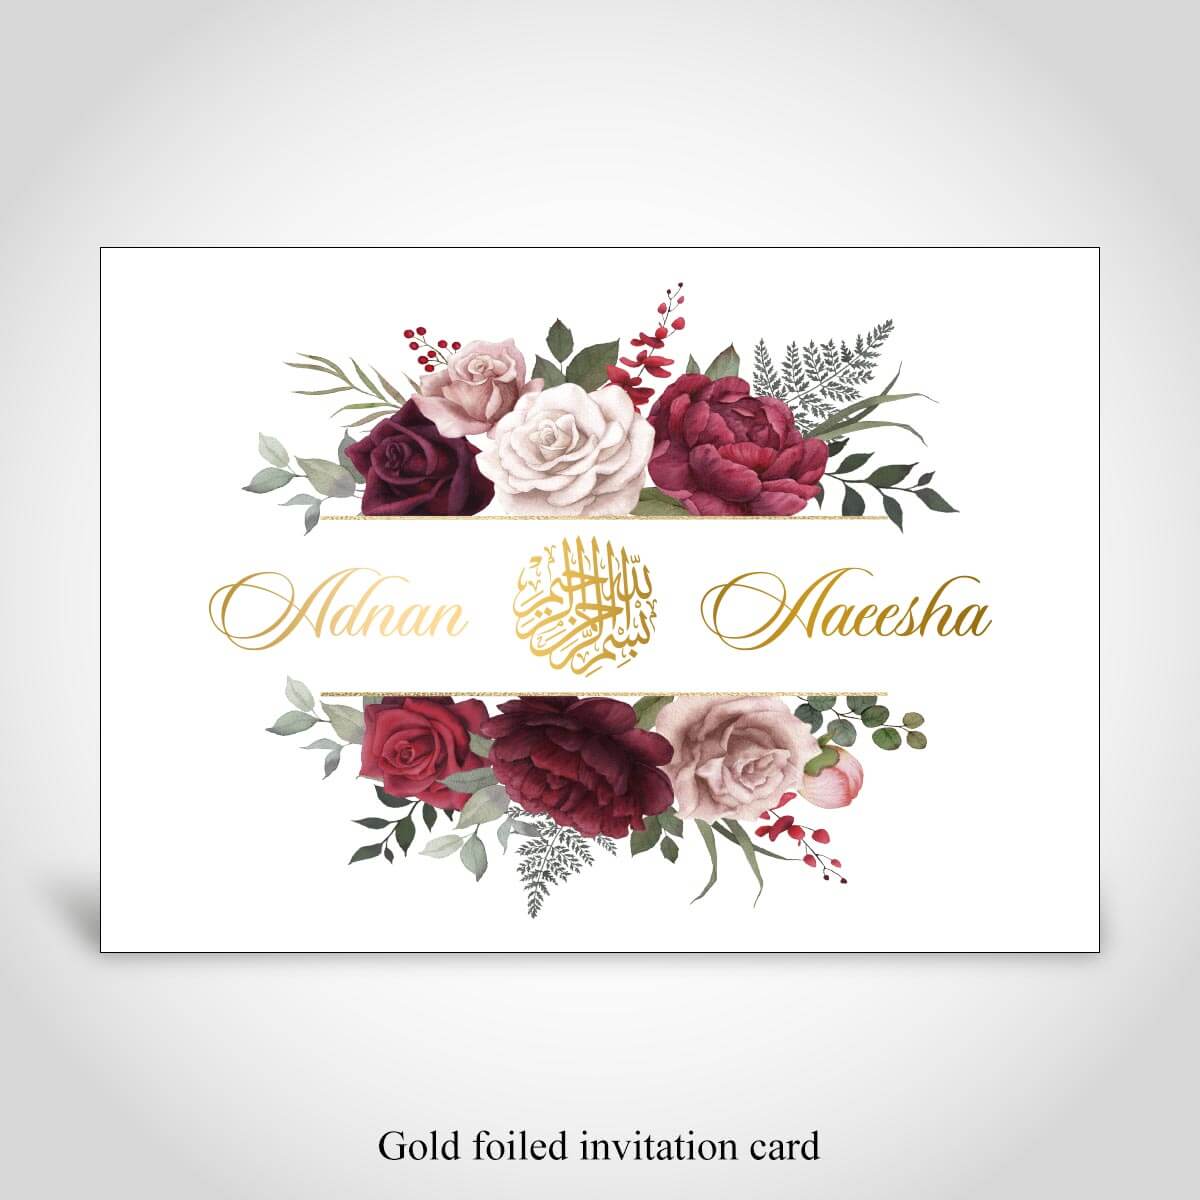 The Perfect Muslim Wedding Invitation: Tips, Tricks, And Example CardFusion